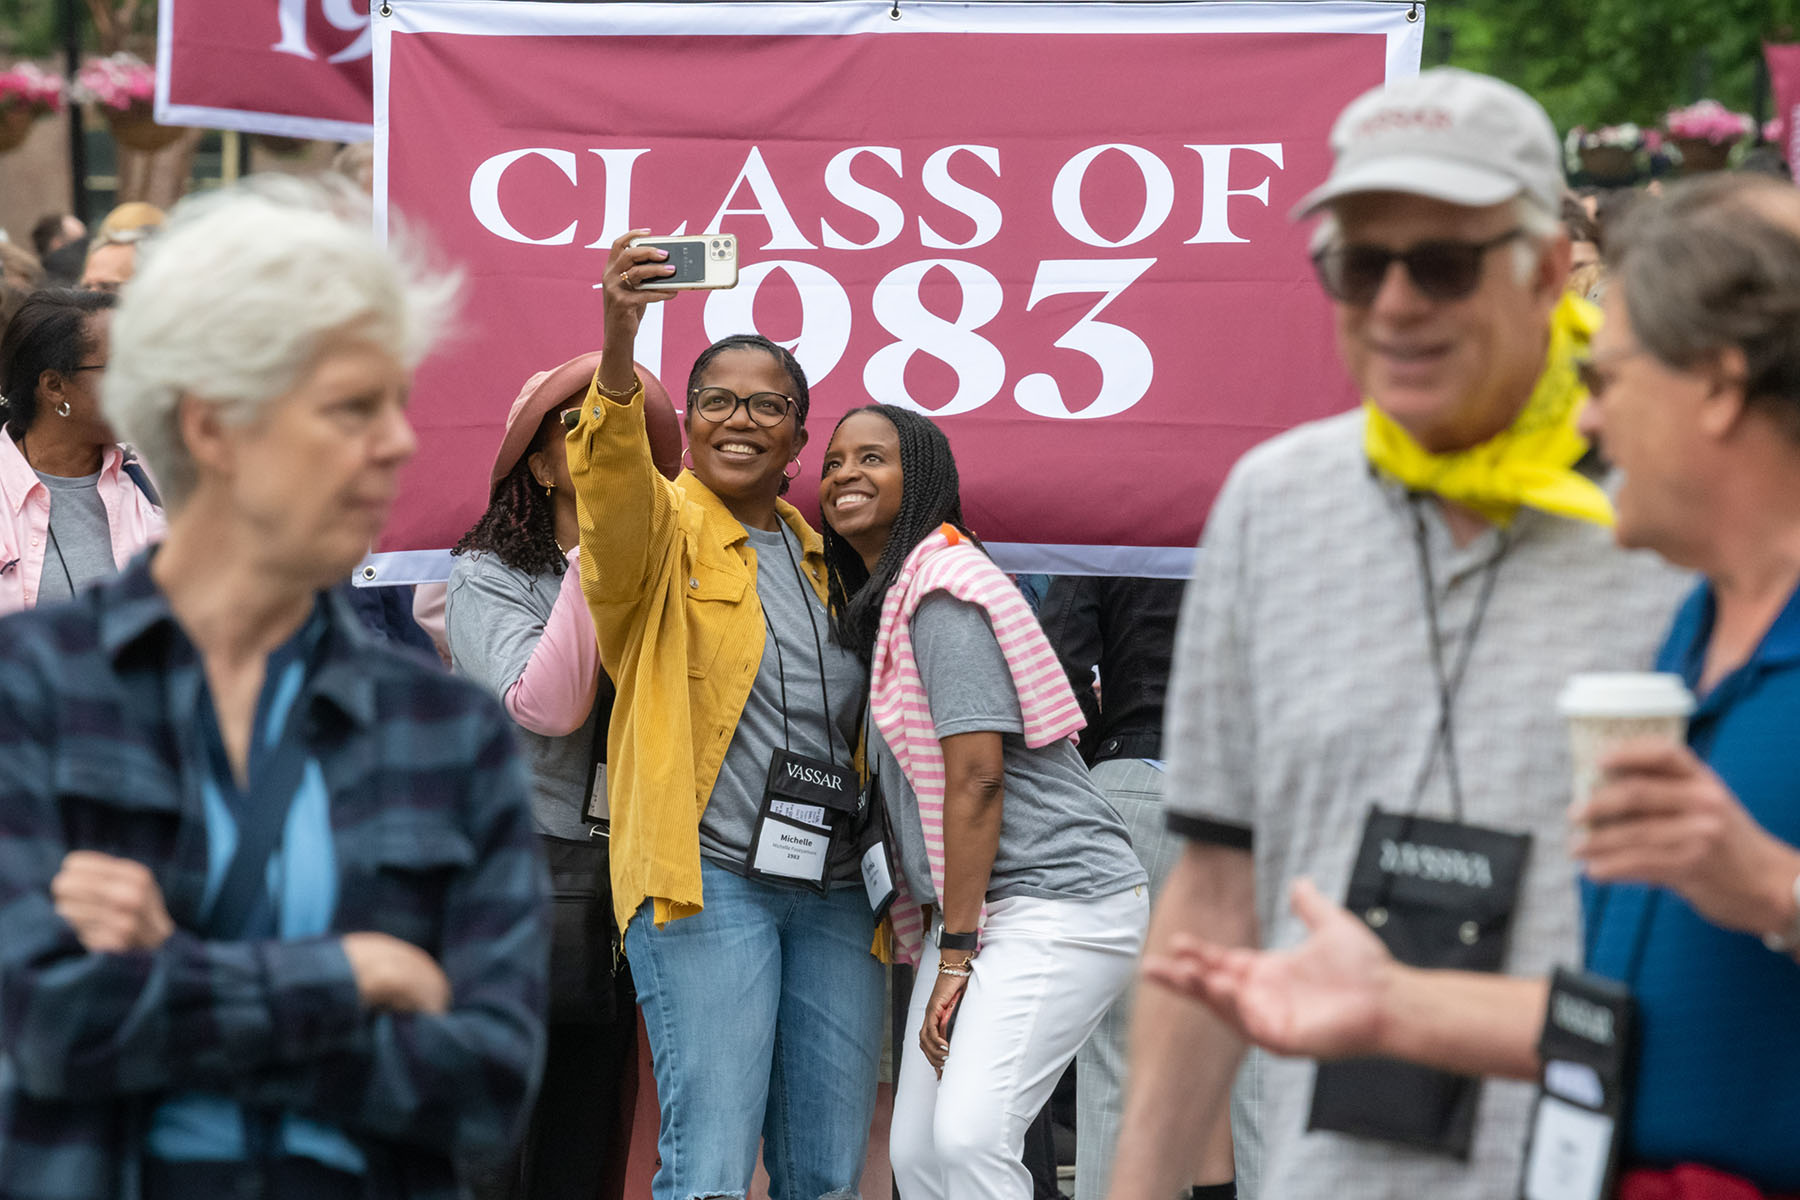 Three women taking a selfie in front of a large burgundy and white banner saying "Class of 1983"